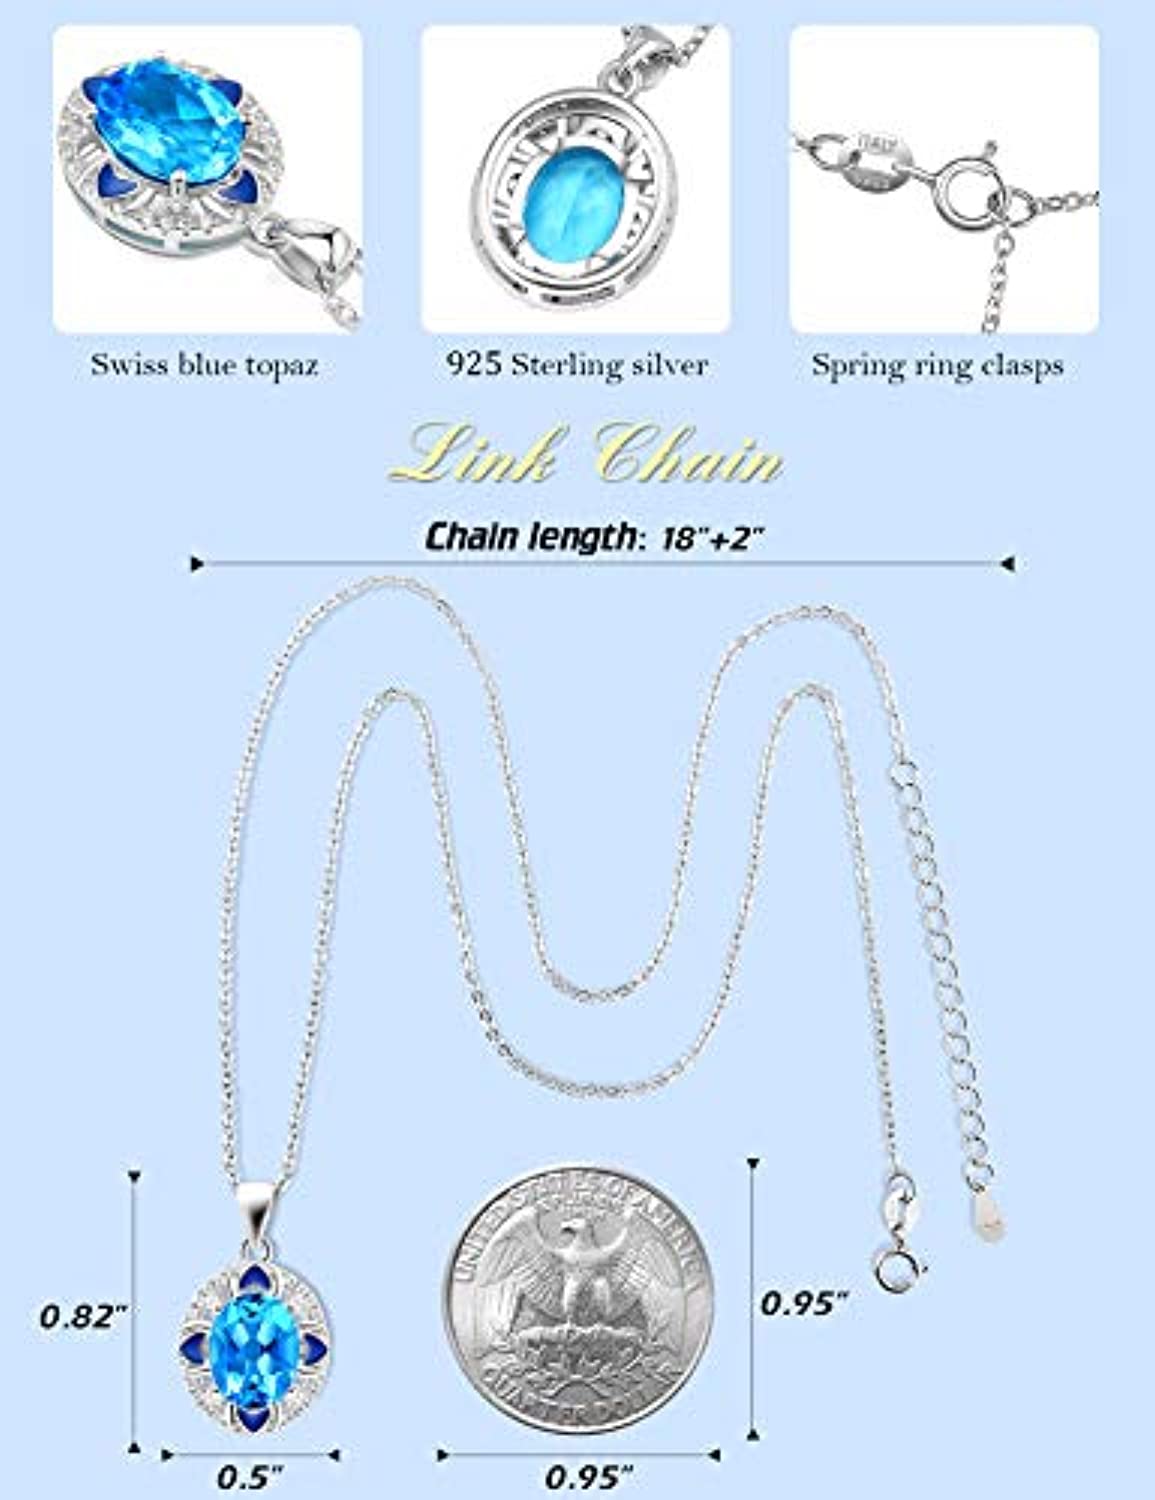 NEW Women Girl Jewelry Set 10mm Round Blue Topaz Gems Necklace Pendant Rings